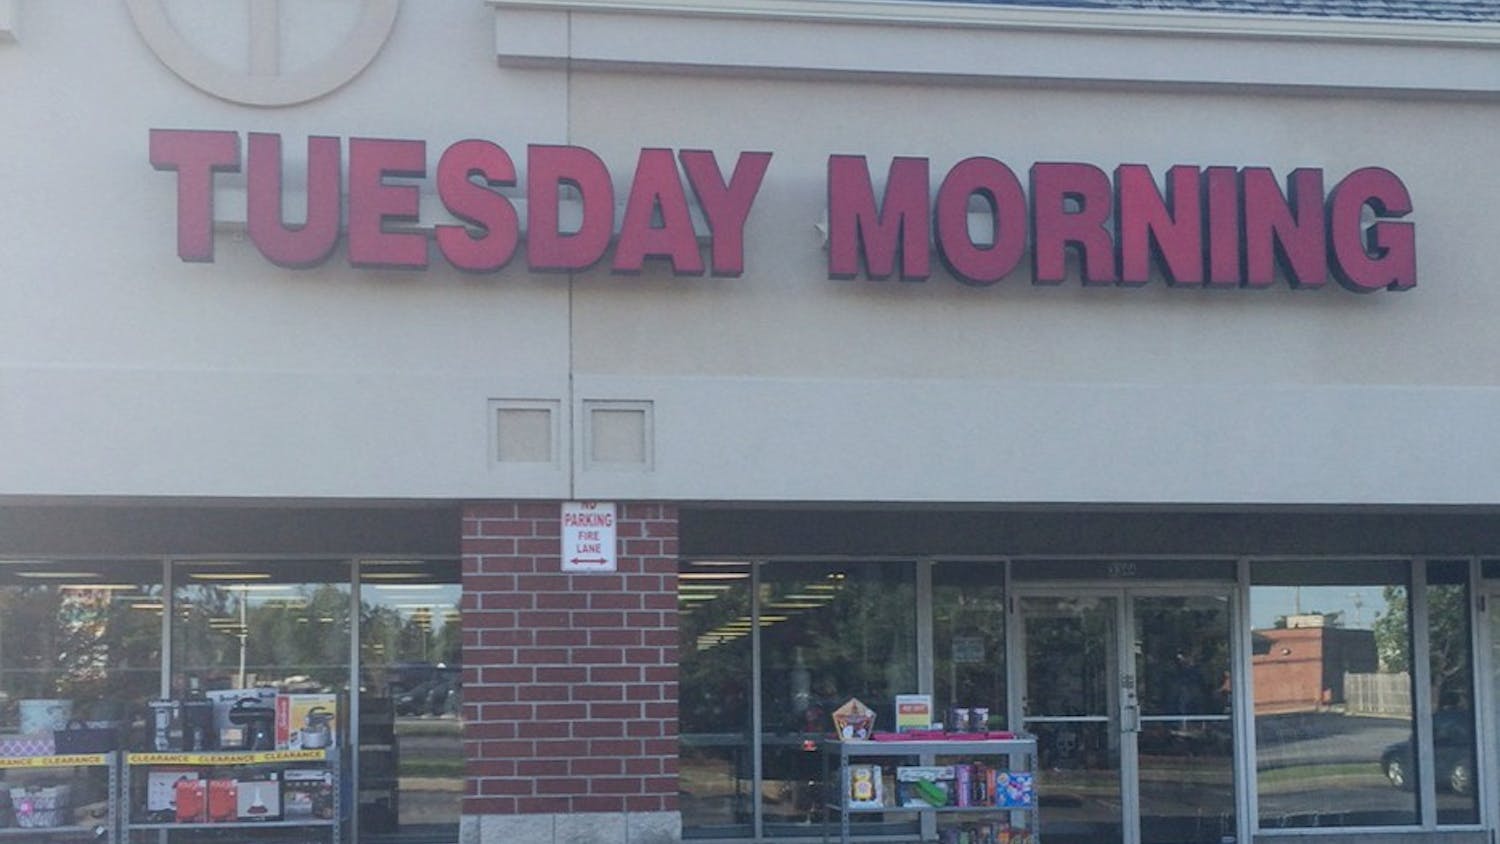 Tuesday Morning has more than just clothing, the store has supplies, electronics and knick knacks.